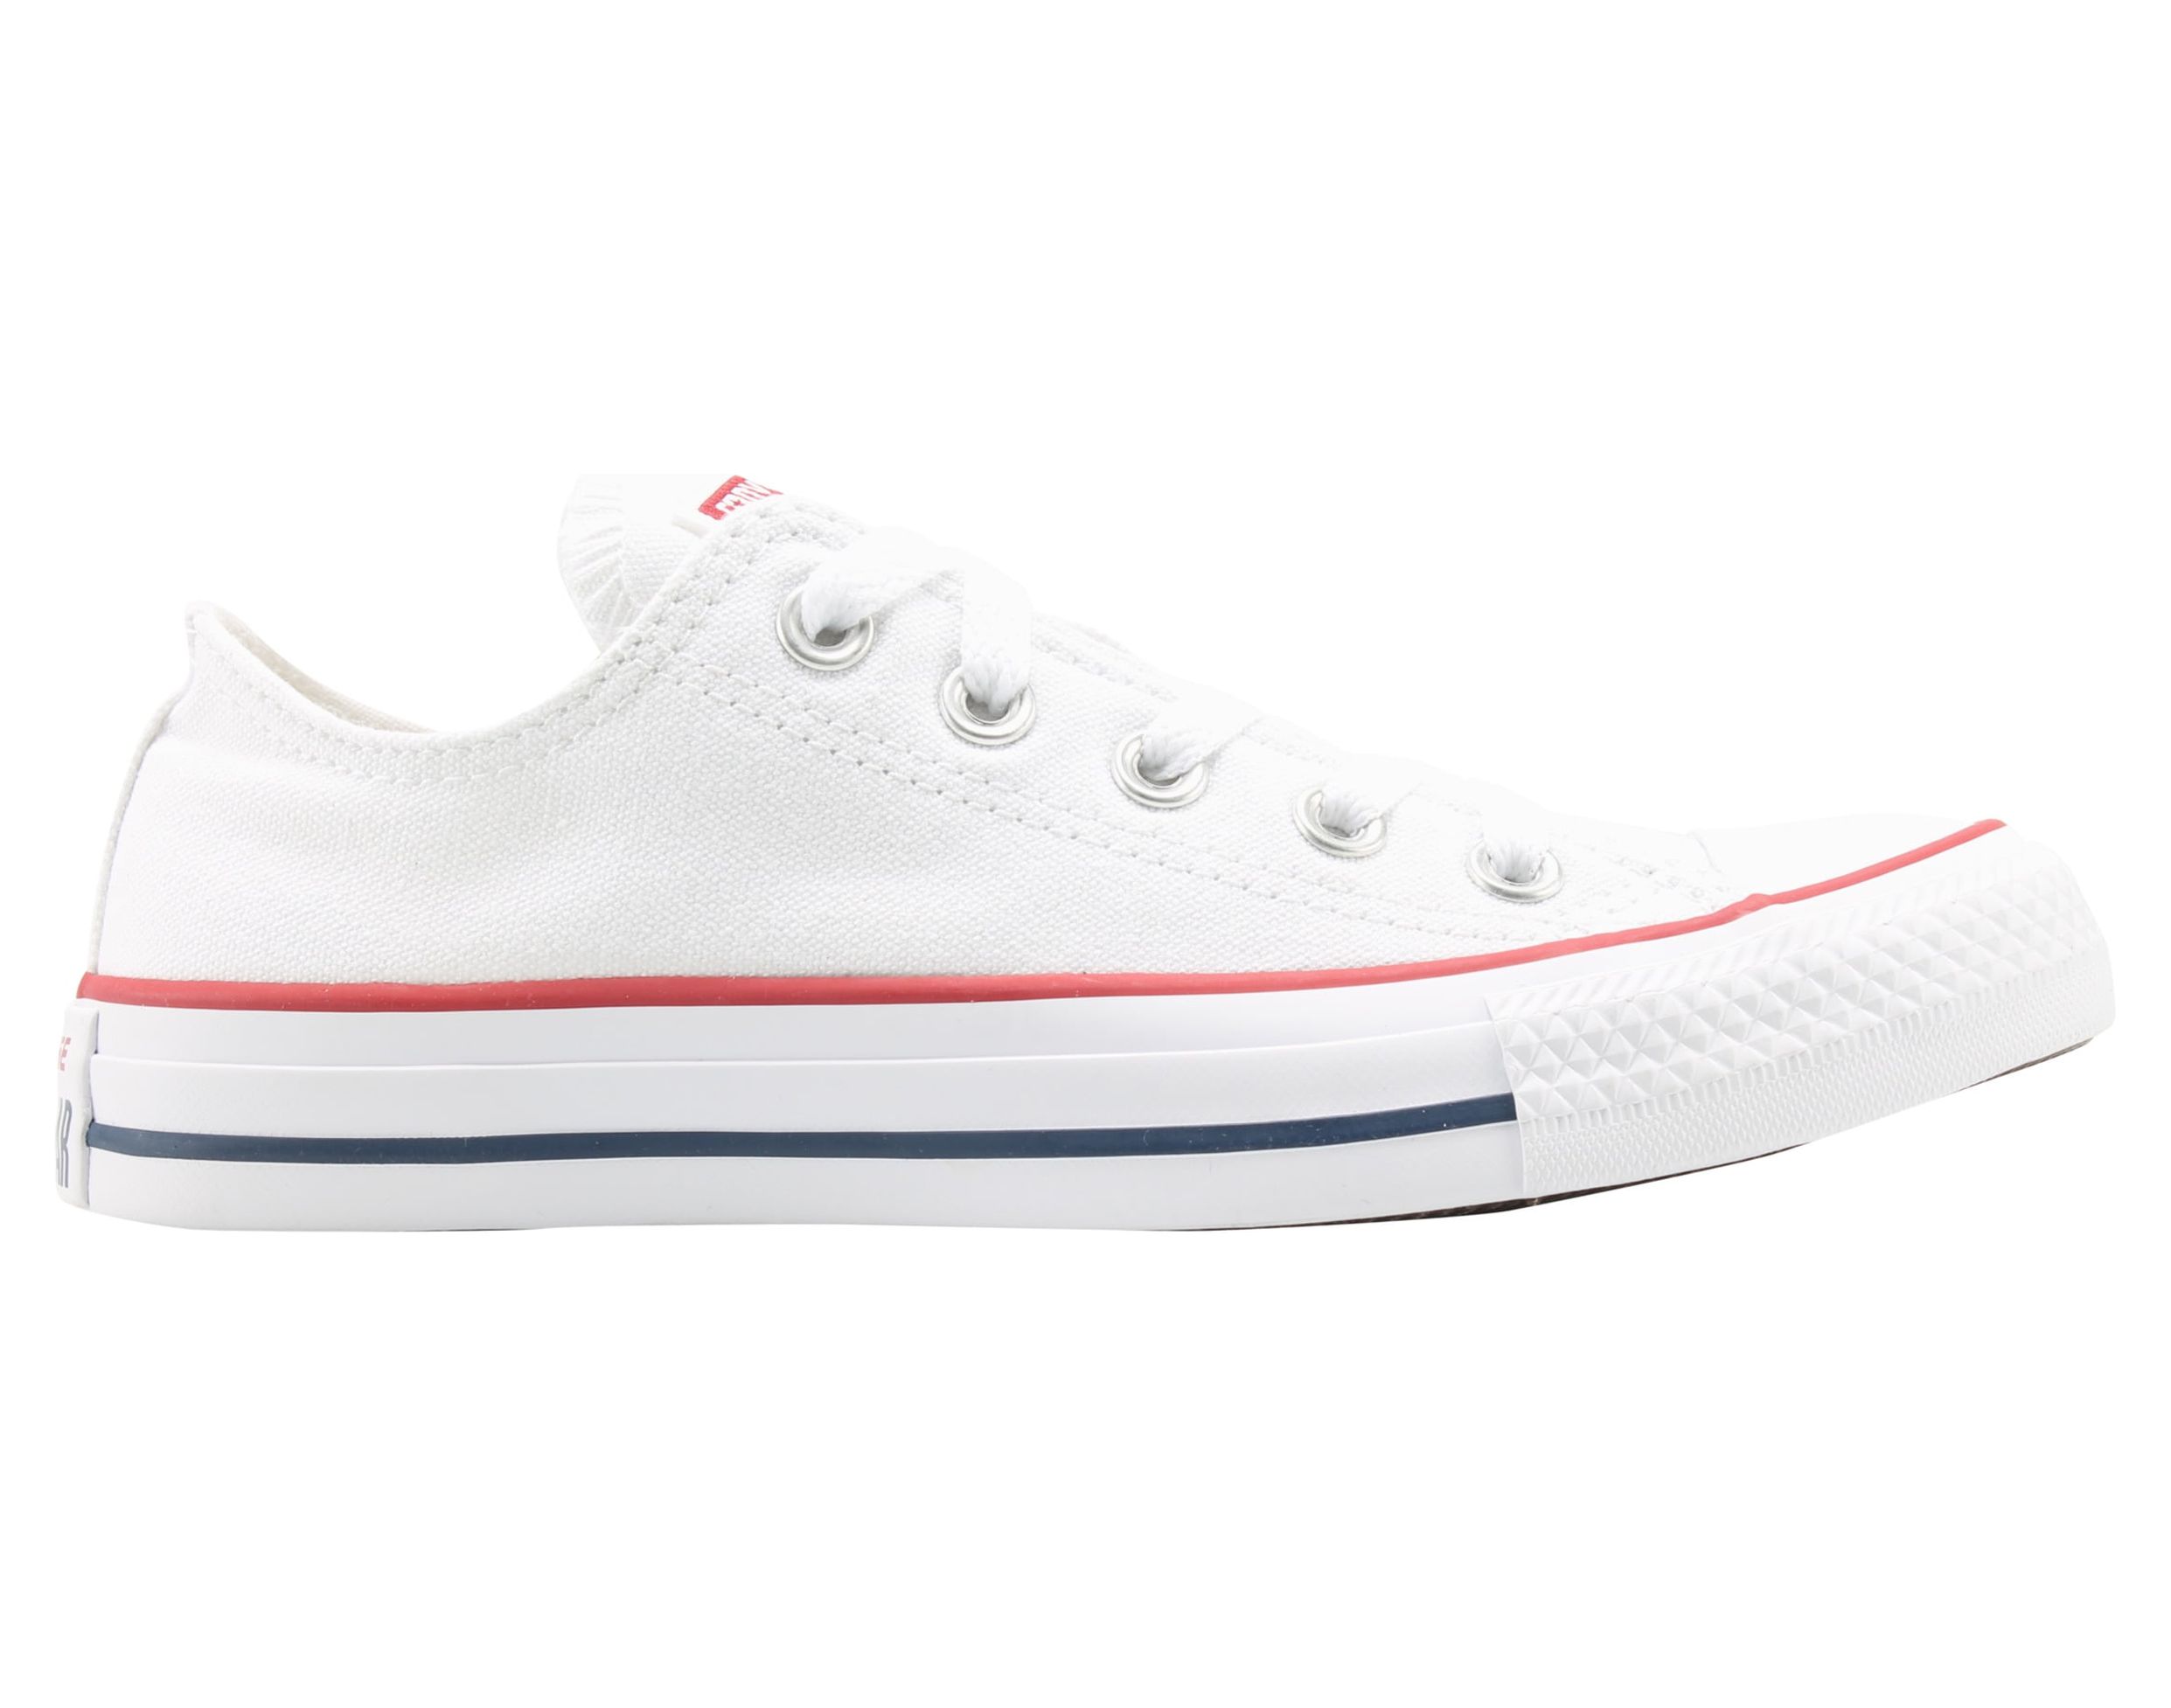 Converse M Converse Chuck Taylor All Star Ox M7652 - image 2 of 6